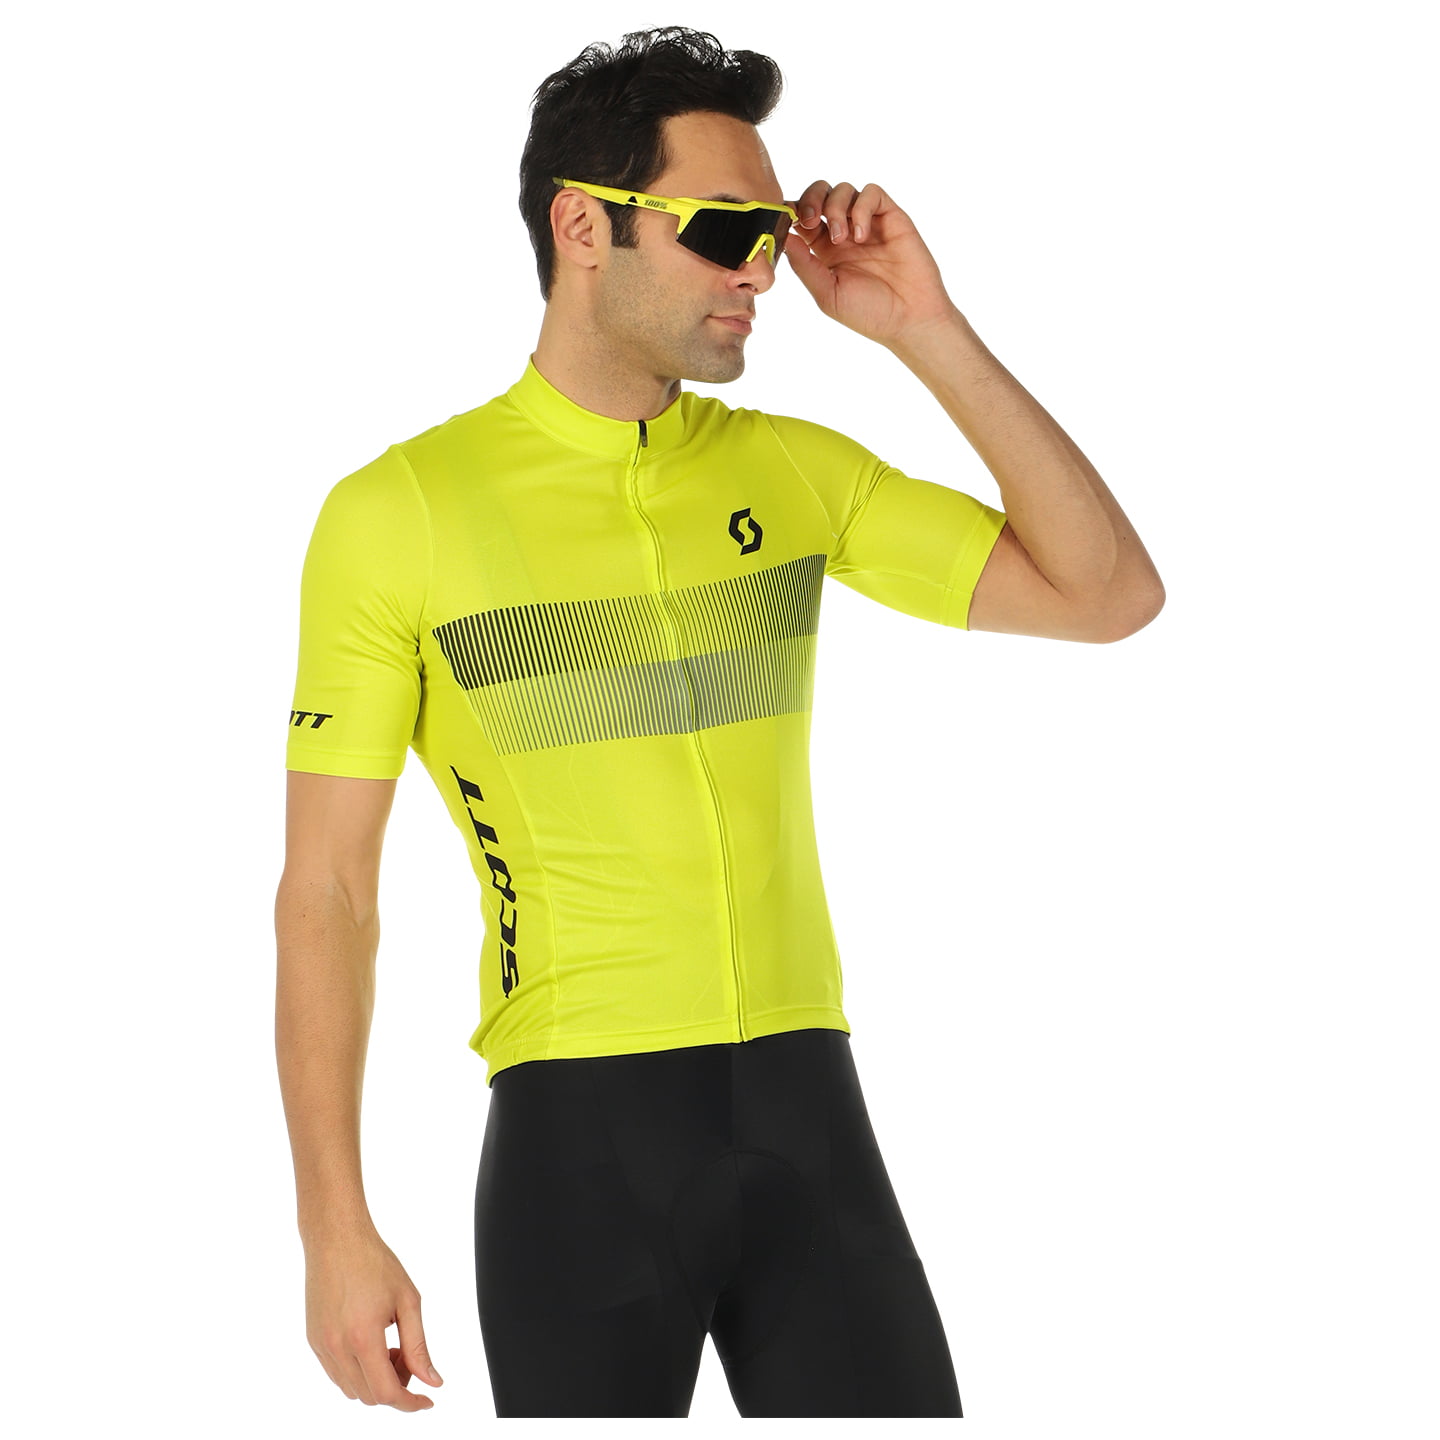 SCOTT RC Team 10 Short Sleeve Jersey, for men, size L, Cycling jersey, Cycling clothing